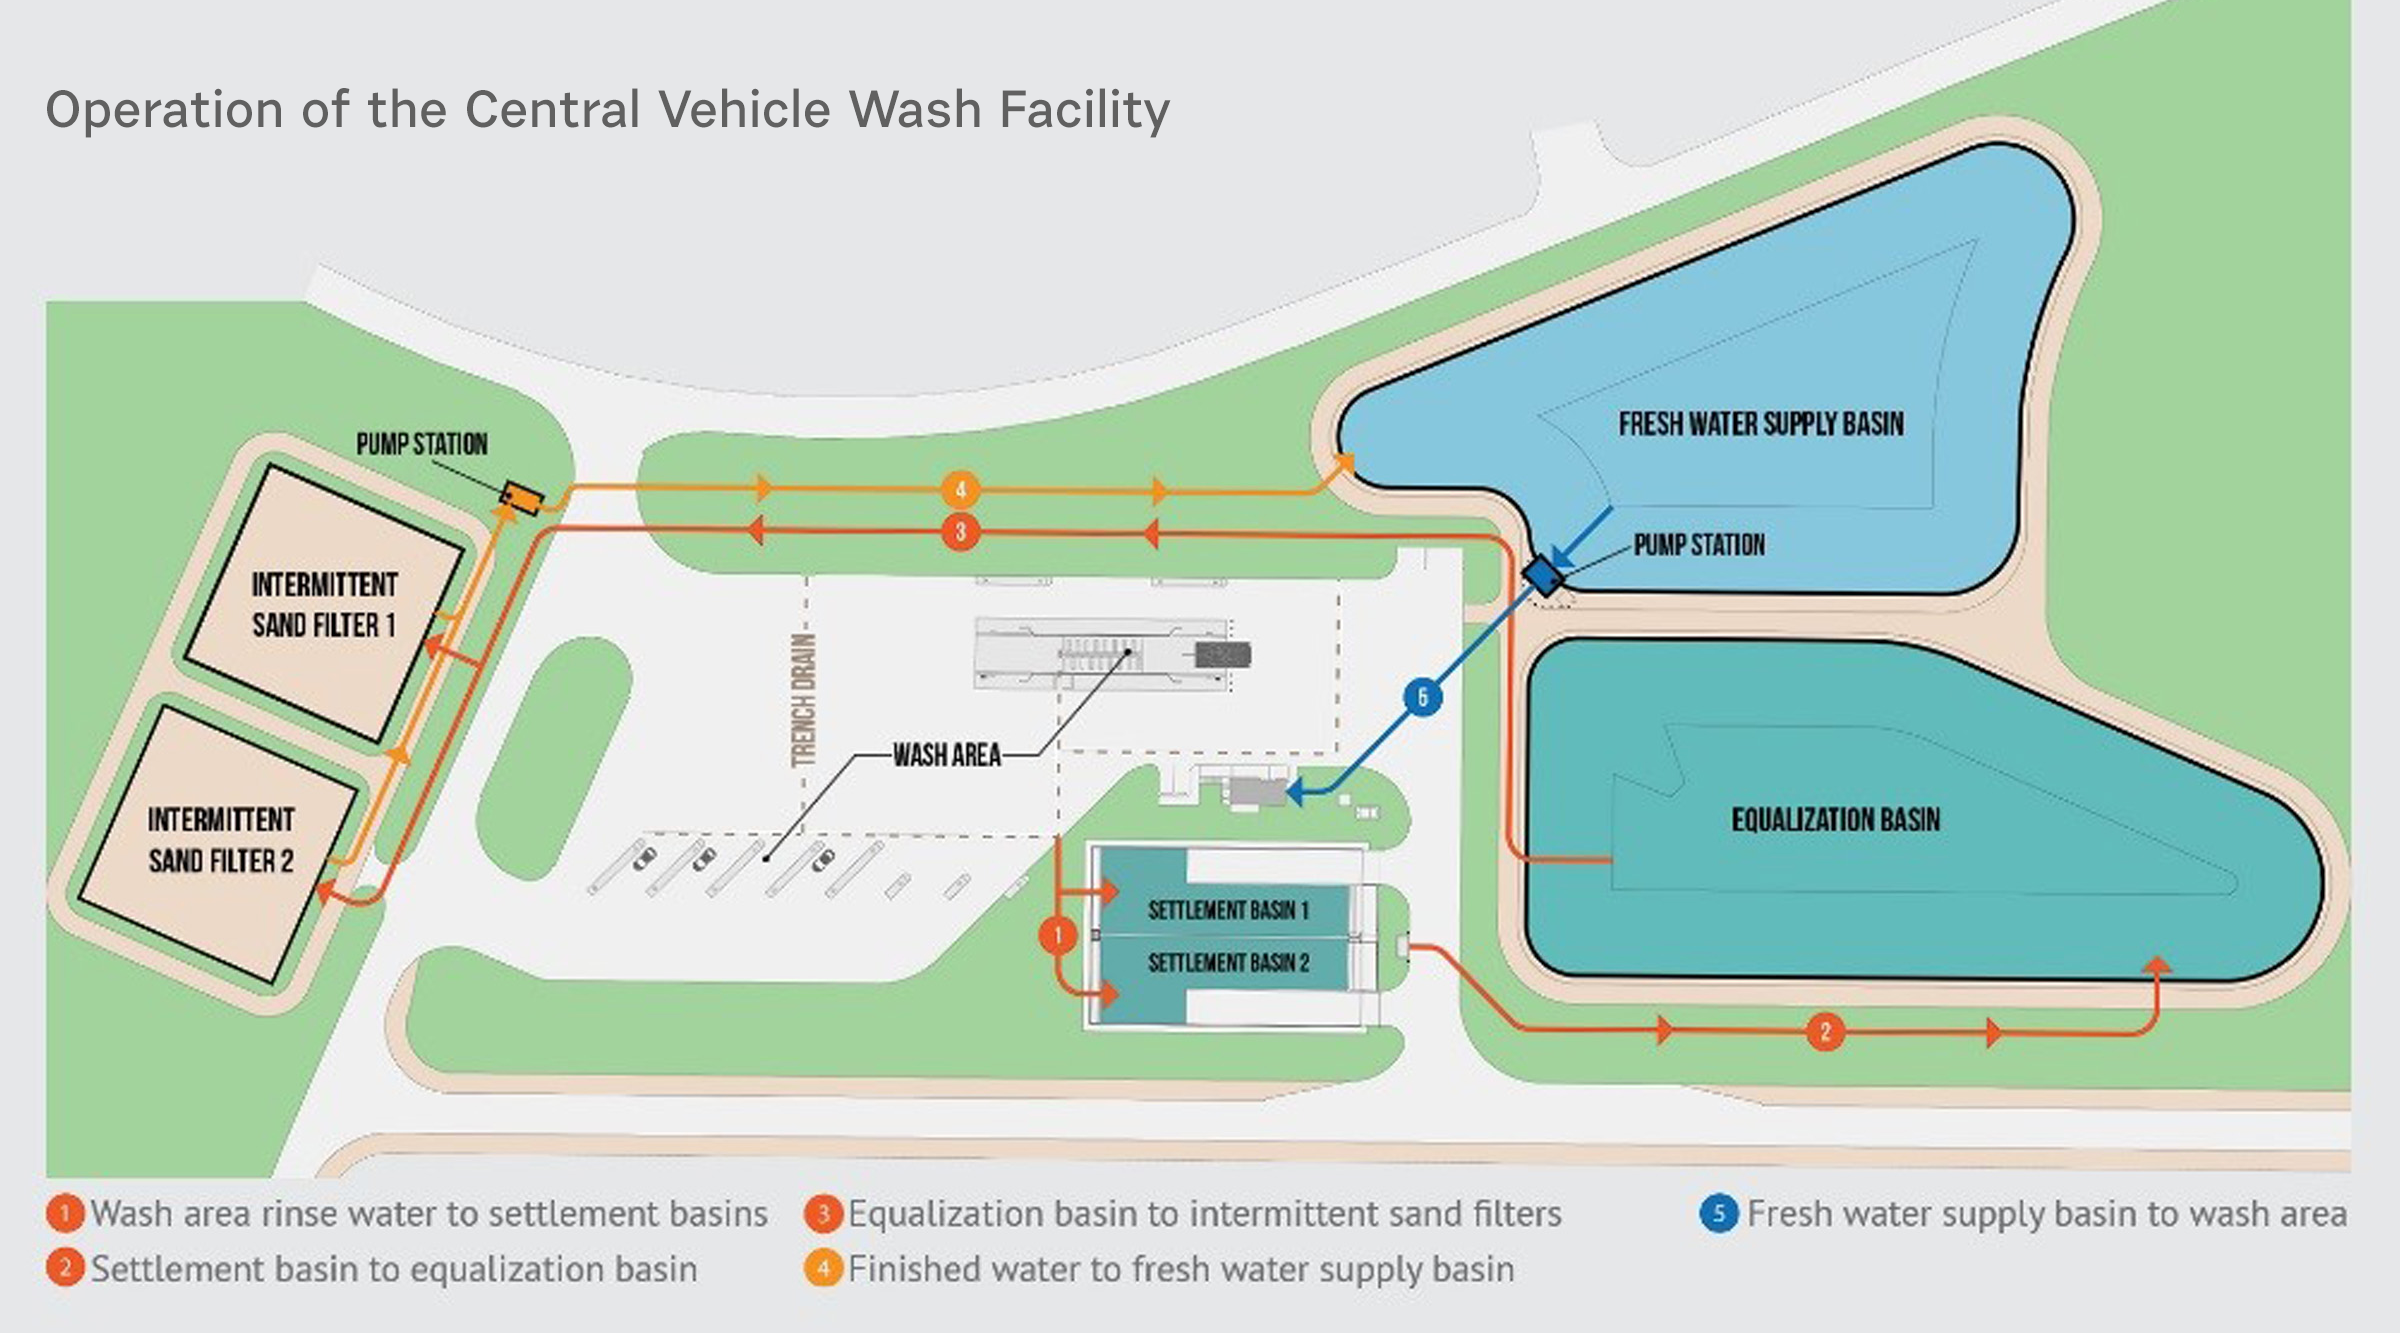 Operation of the Central Vehicle Wash Facility